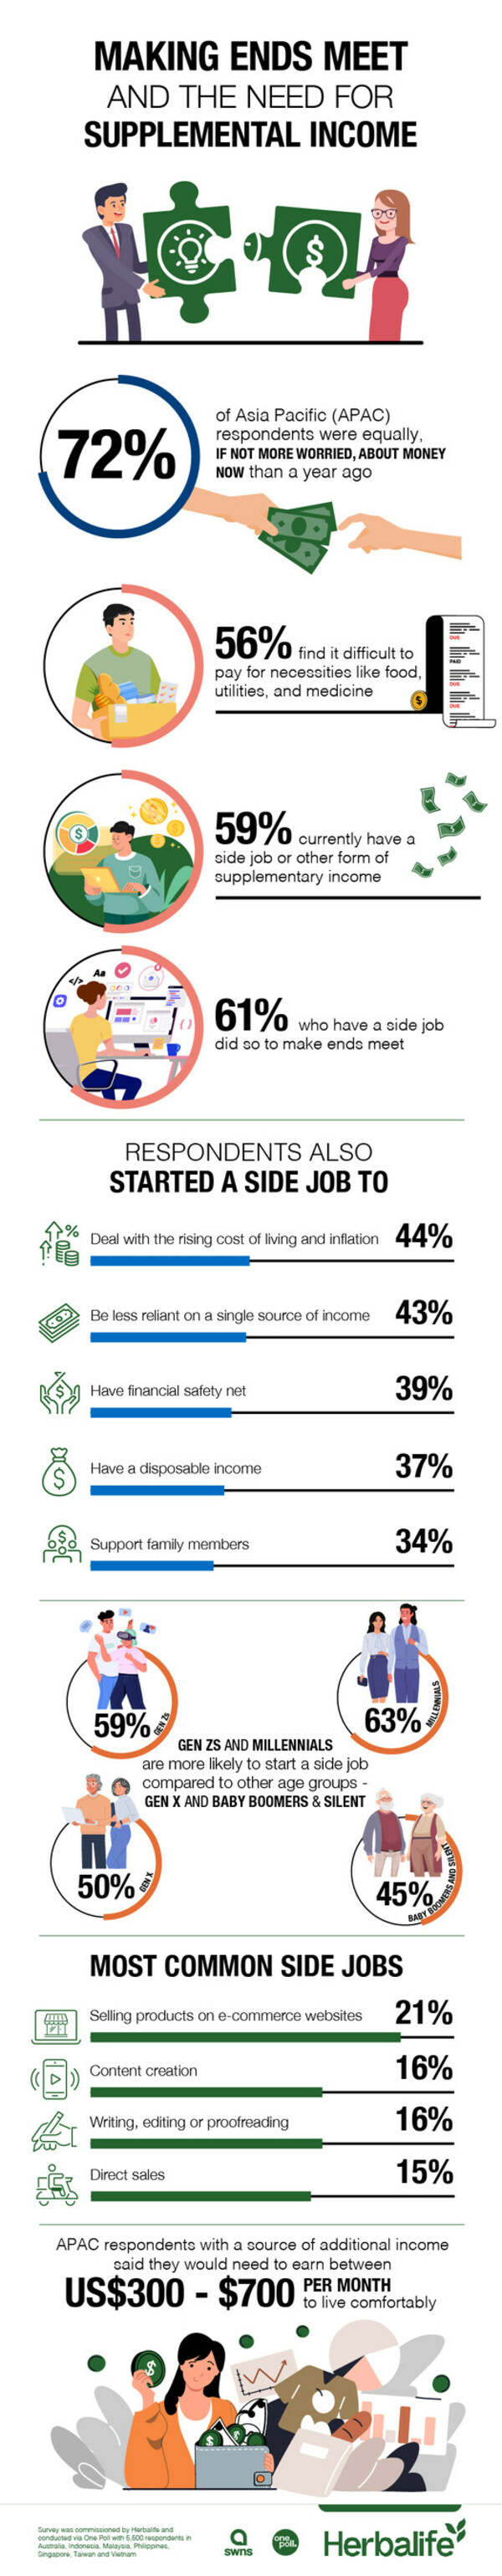 3 in 5 people Have Side Job to Help Make Ends Meet - Herbalife Asia Pacific Survey